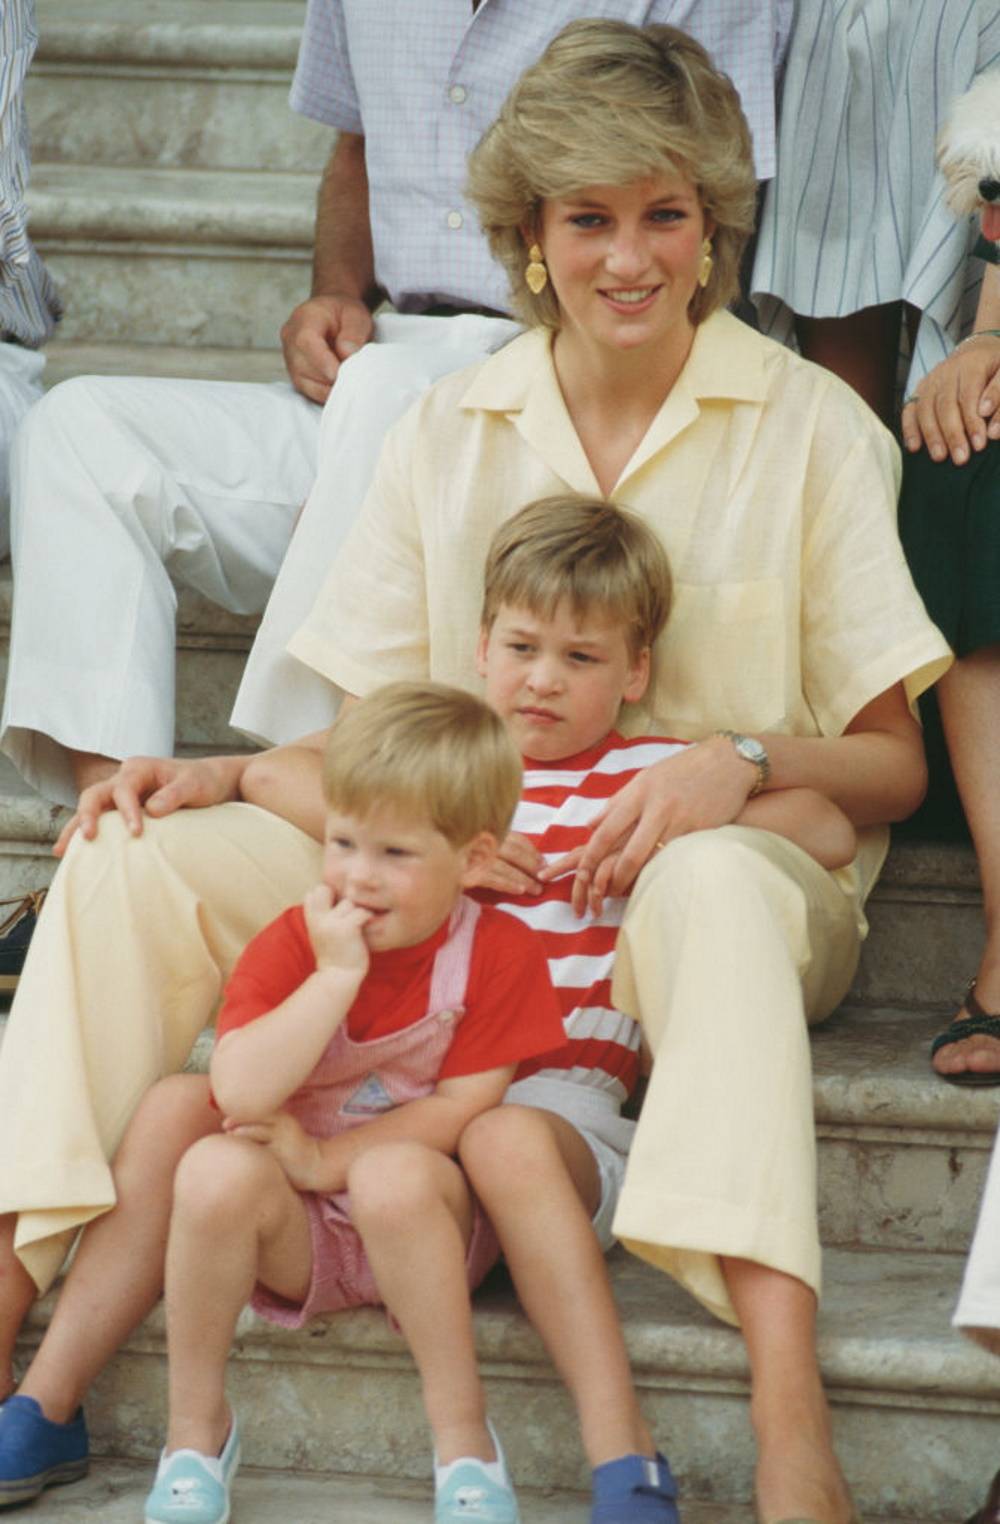  (Photo by Terry Fincher/Princess Diana Archive/Getty Images)